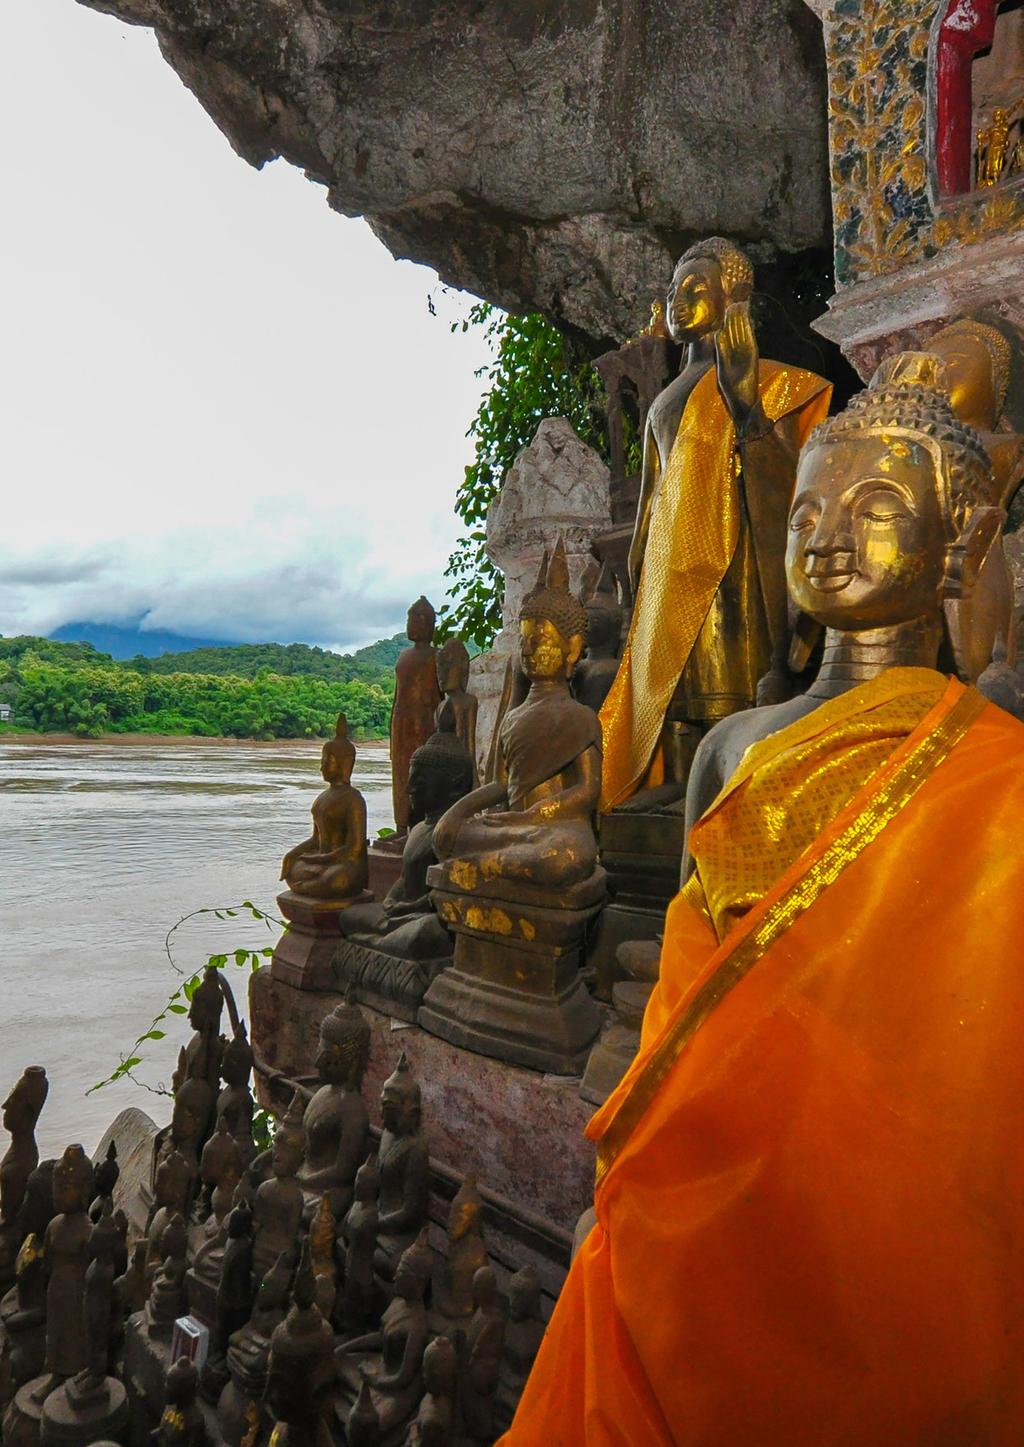 THE LAOS MEKONG 1-14 FEBRUARY 2019 OPTIONAL EXTENSION TO